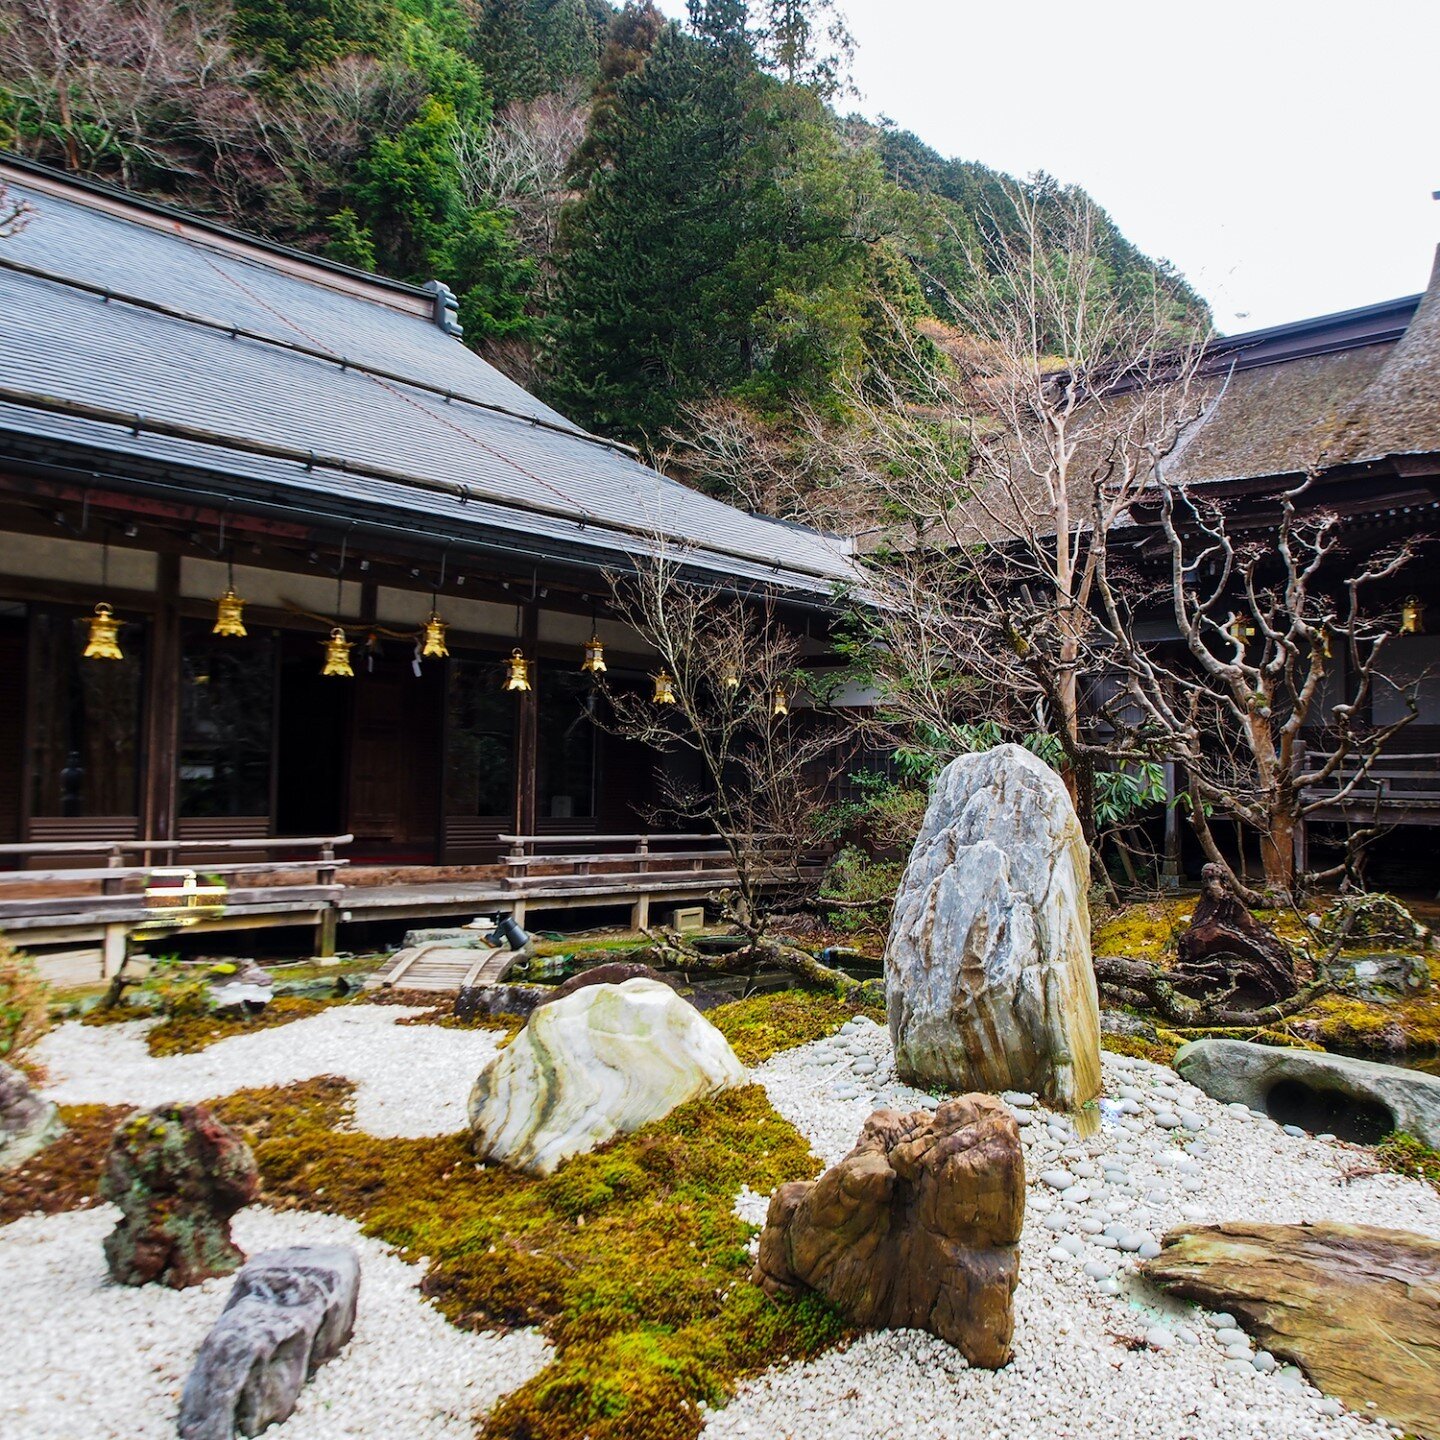 Japanese gardens have a broad range of styles and designs. This one at Koya-san is called a &ldquo;karesansui&rdquo;, used to describe Japanese rock gardens or zen gardens. Karesansui gardens are places of meditation and zen, with sand often replaces